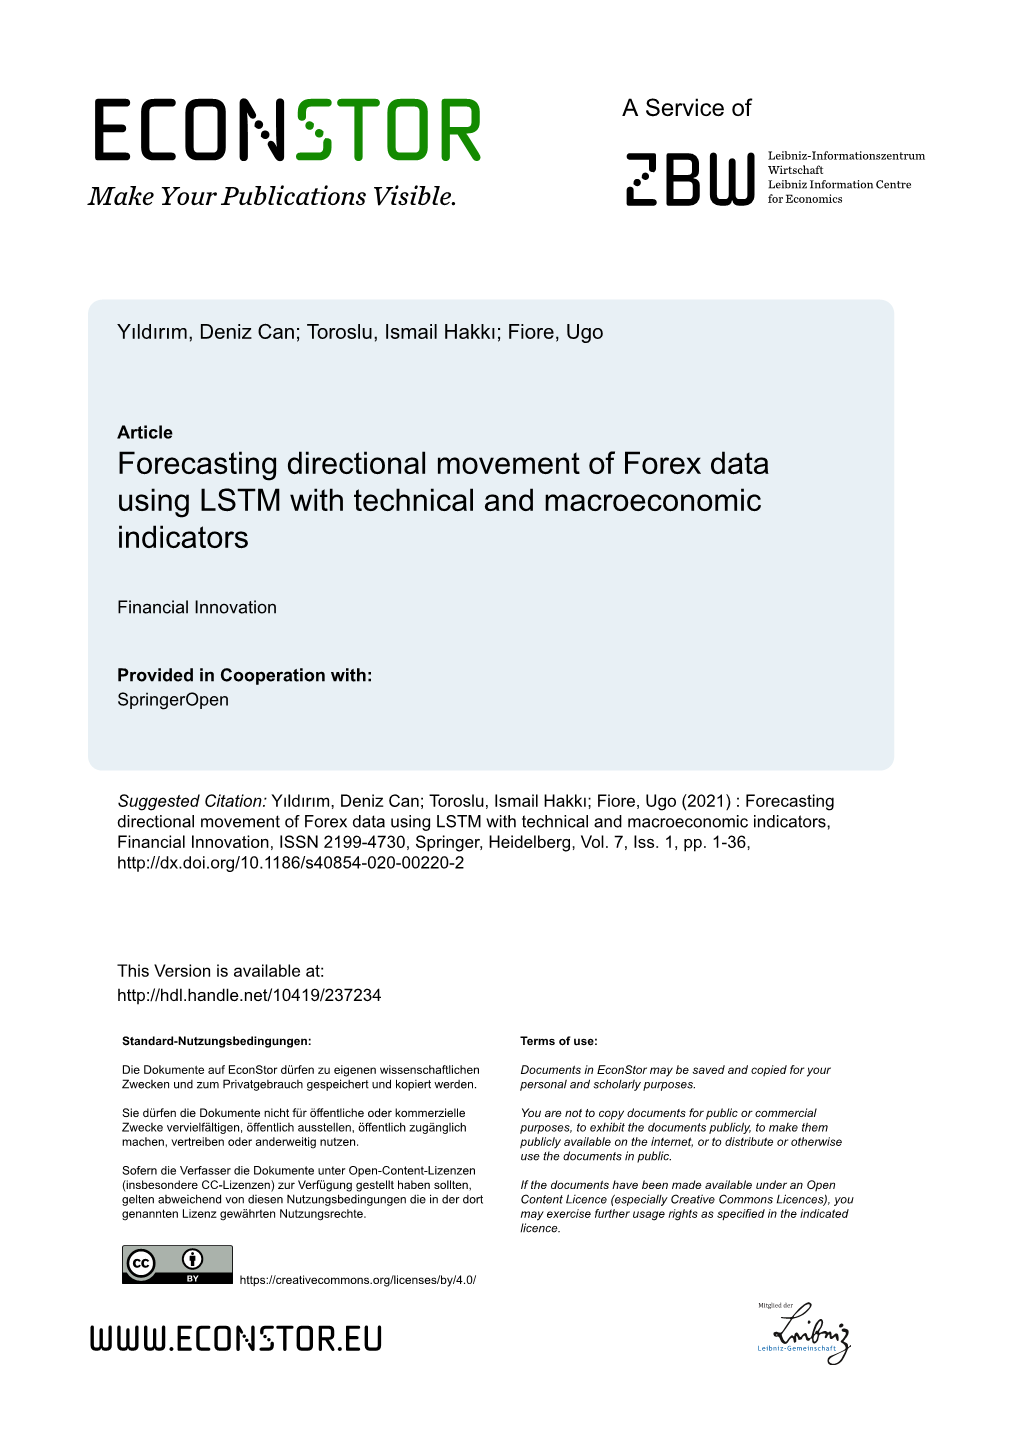 Forecasting Directional Movement of Forex Data Using LSTM with Technical and Macroeconomic Indicators